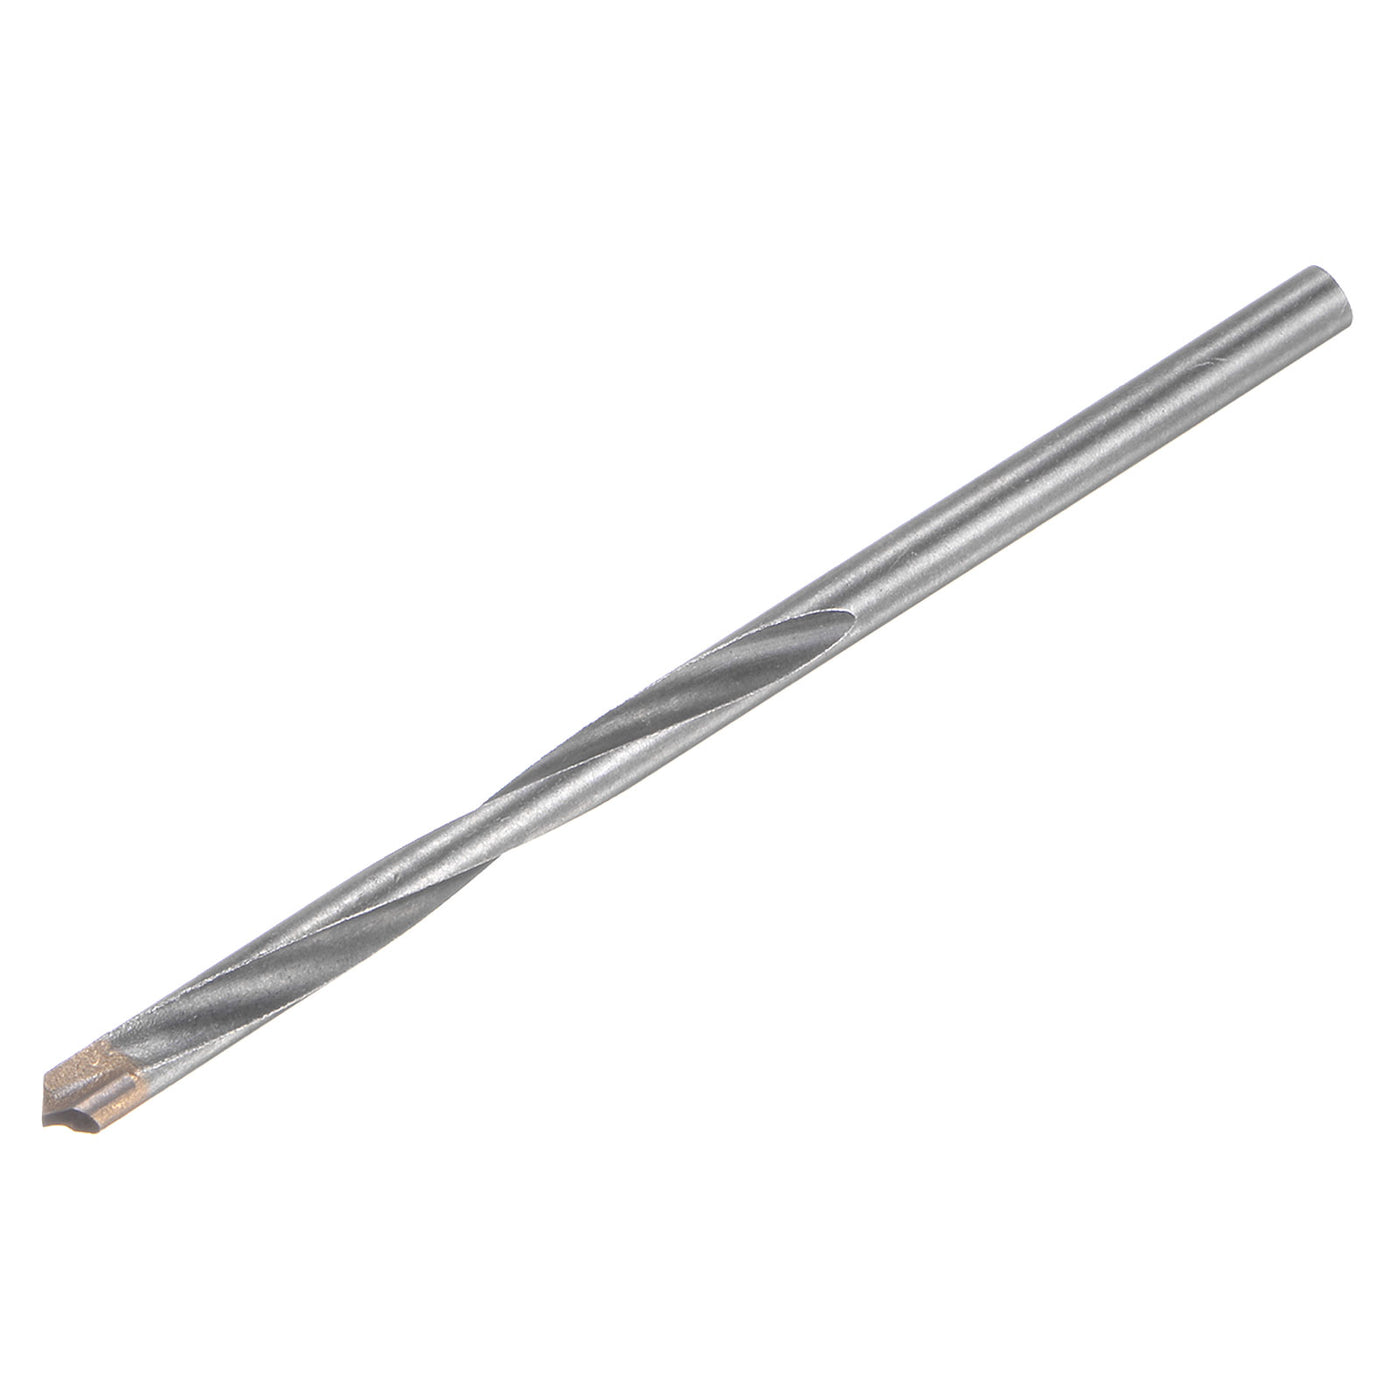 uxcell Uxcell 5mm Cutting Dia Round Shank Cemented Carbide Twist Drill Bit, 100mm Length